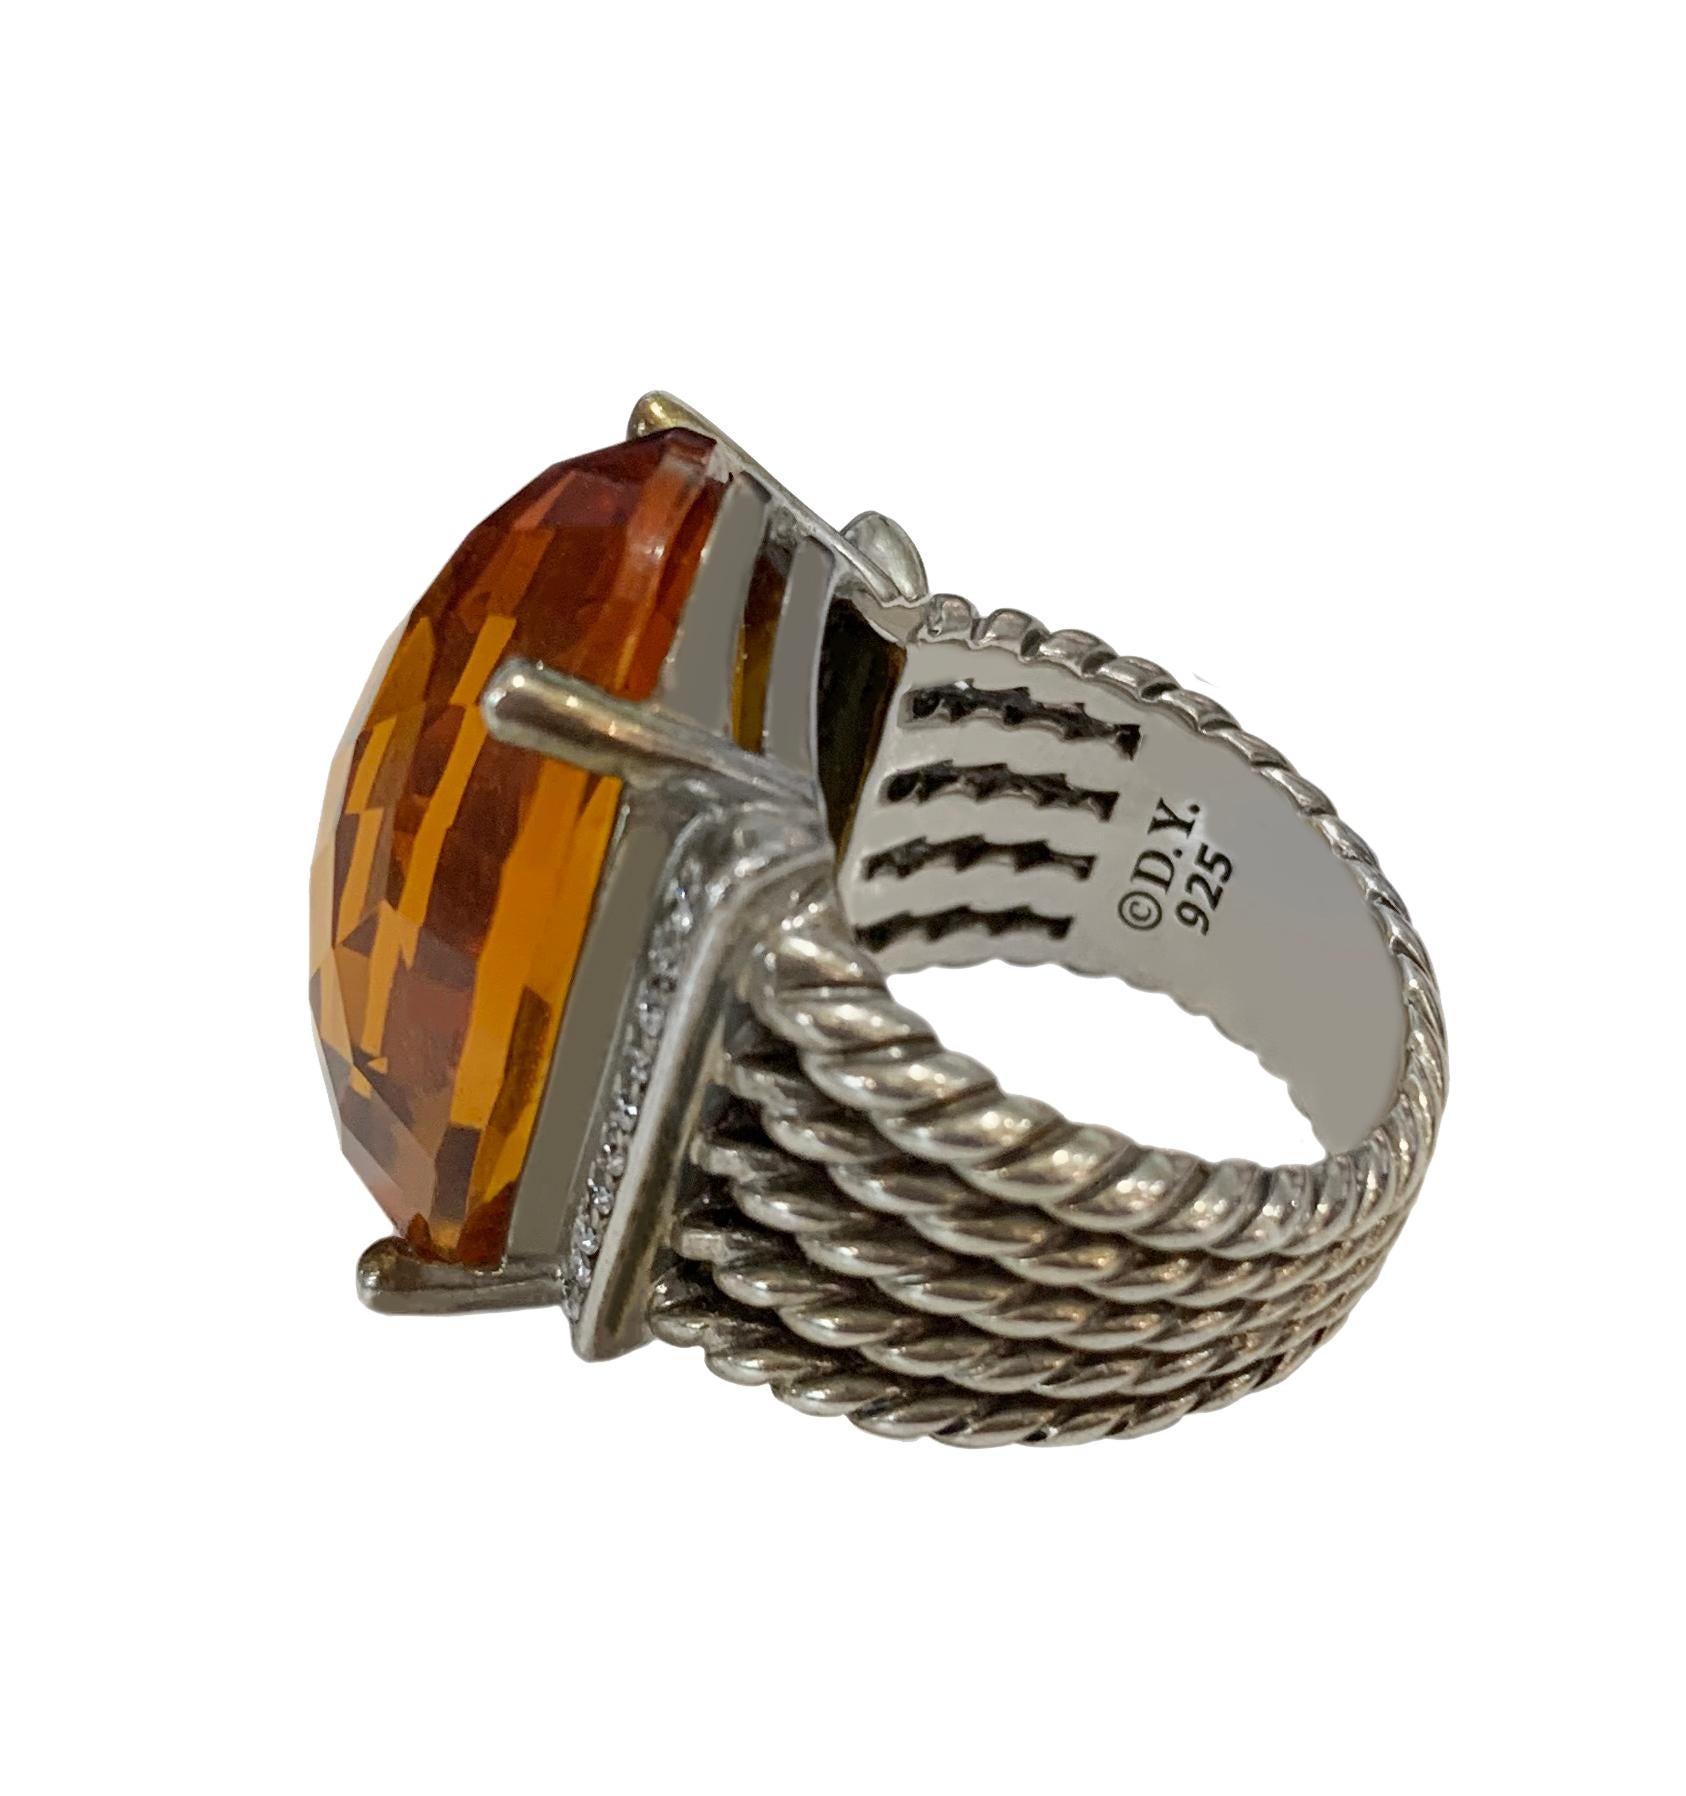 Sterling silver
Ring size: 6.5
Citrine dimension: 15x26mm
Comes with David Yurman pouch
Retail: $1850